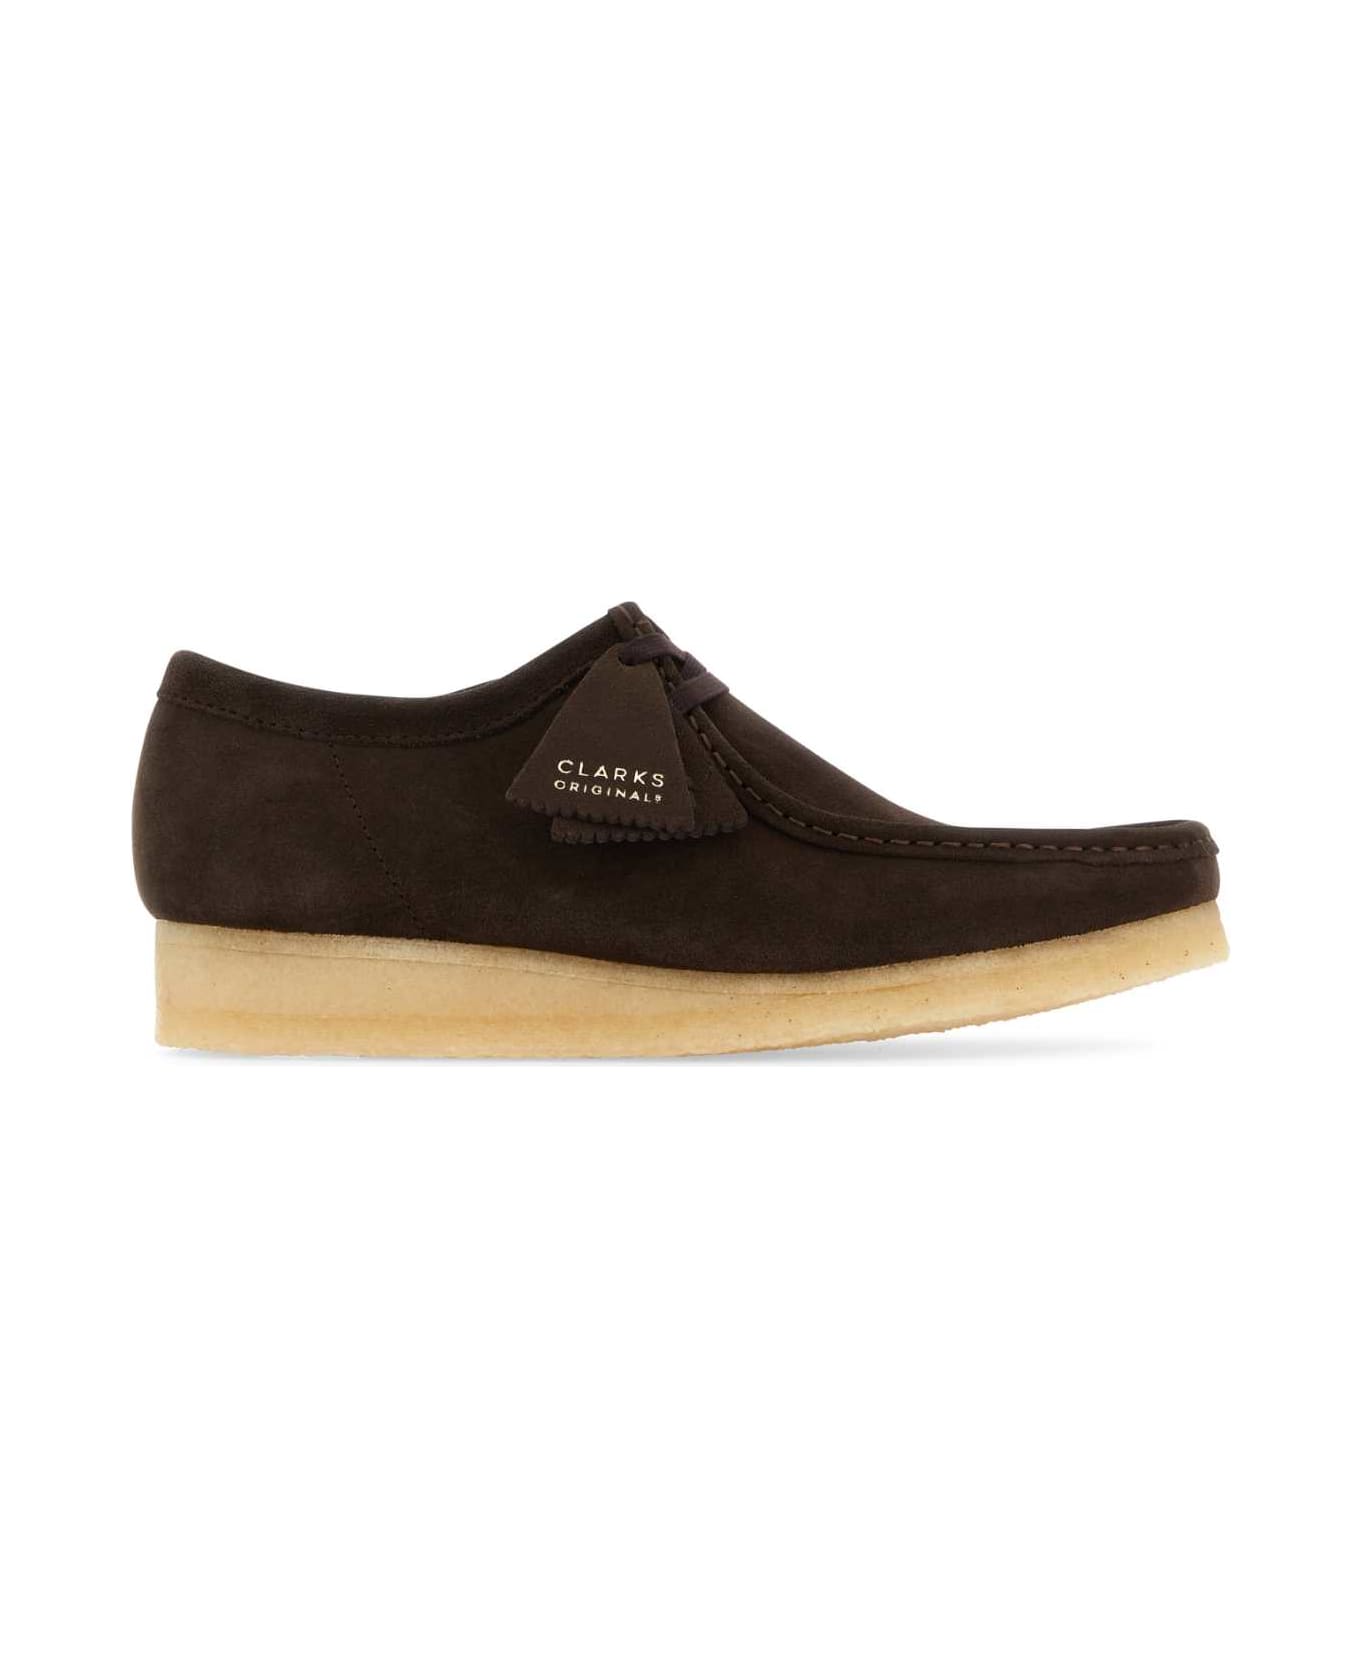 Clarks Chocolate Suede Wallabee Ankle Boots - DARKBROWNSUEDE